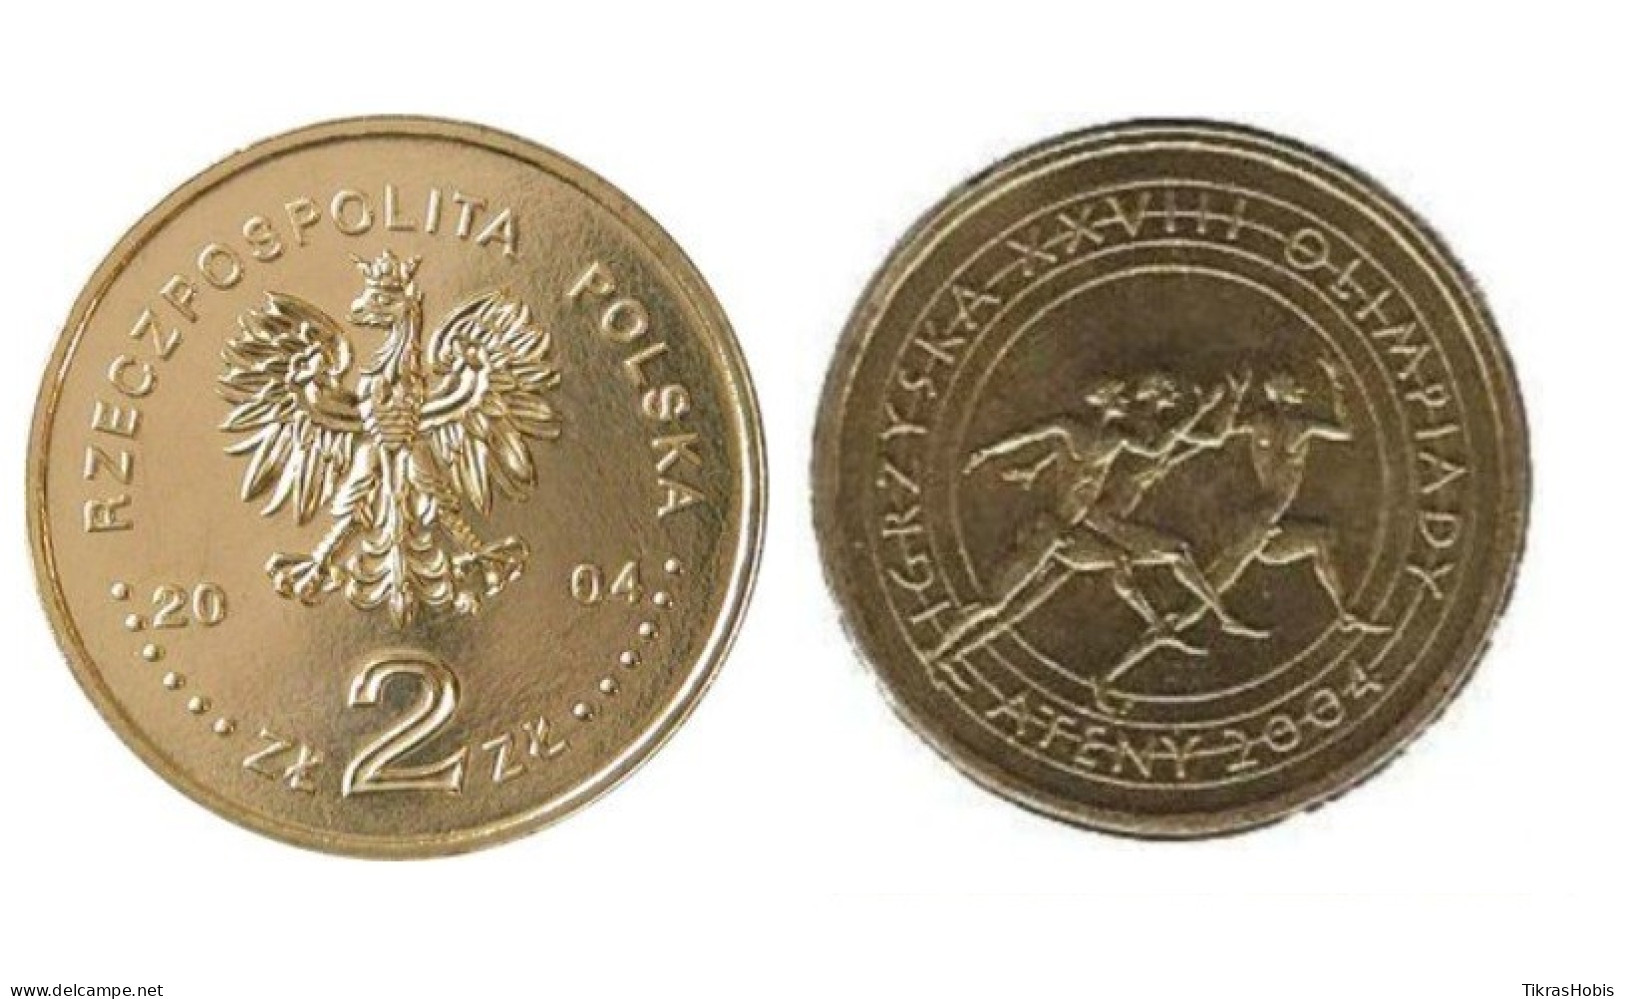 Poland 2 Zlotys, 2004 Athens Y516 - Pologne